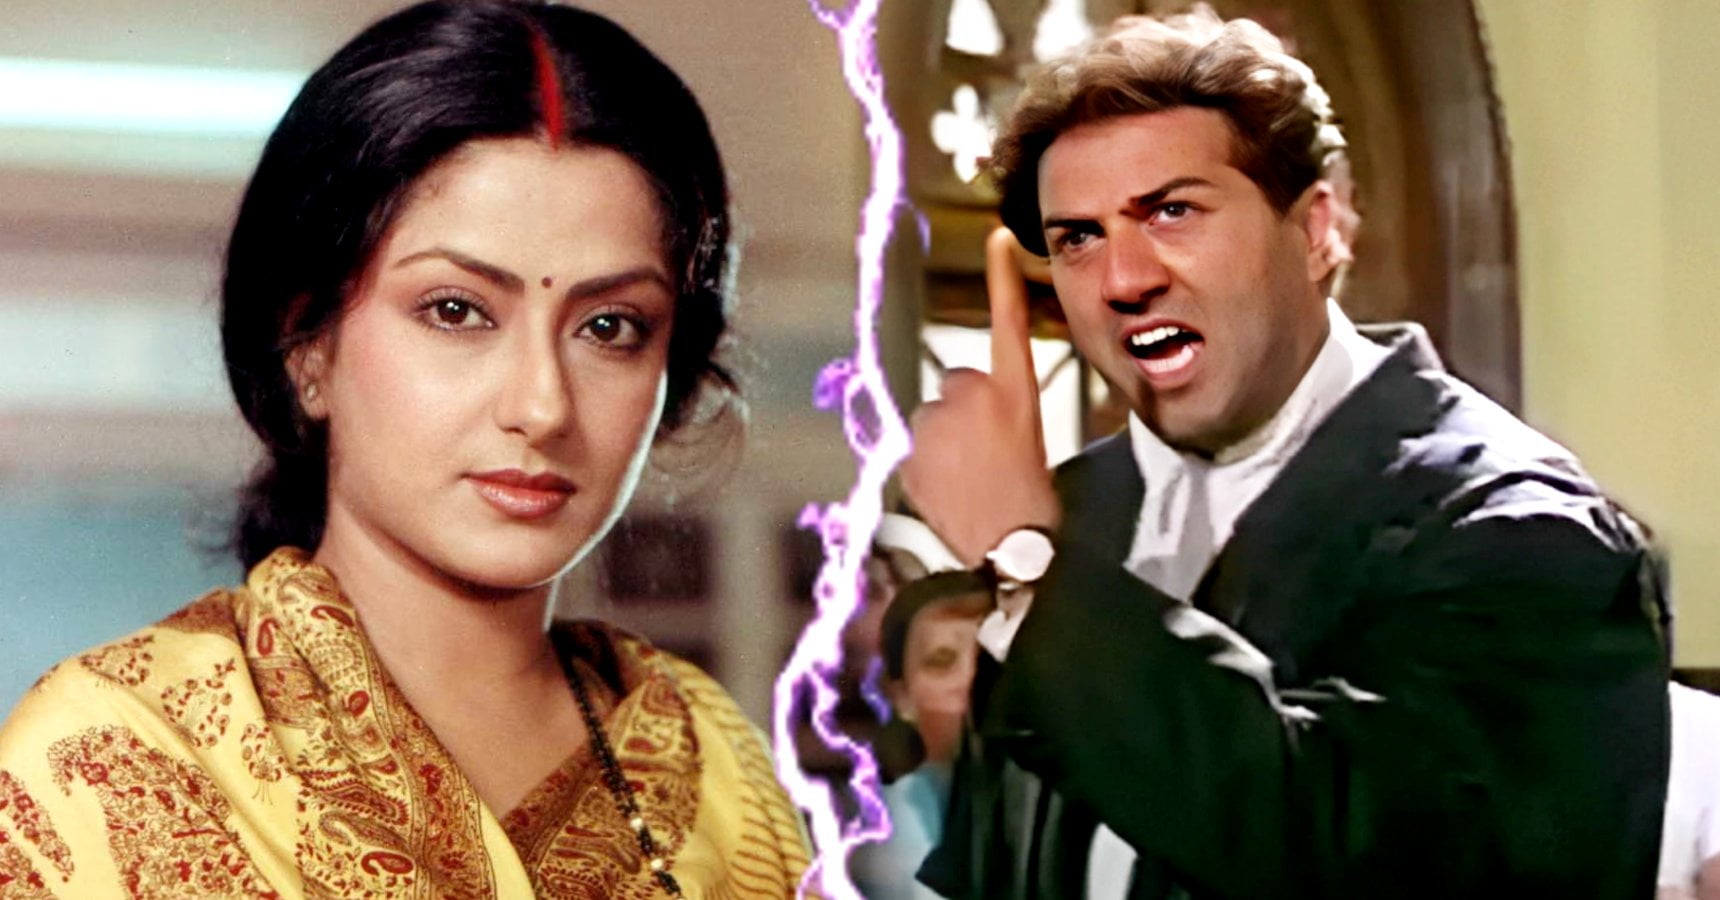 When Bollywood actress Moushumi Chatterjee scolded Sunny Deol